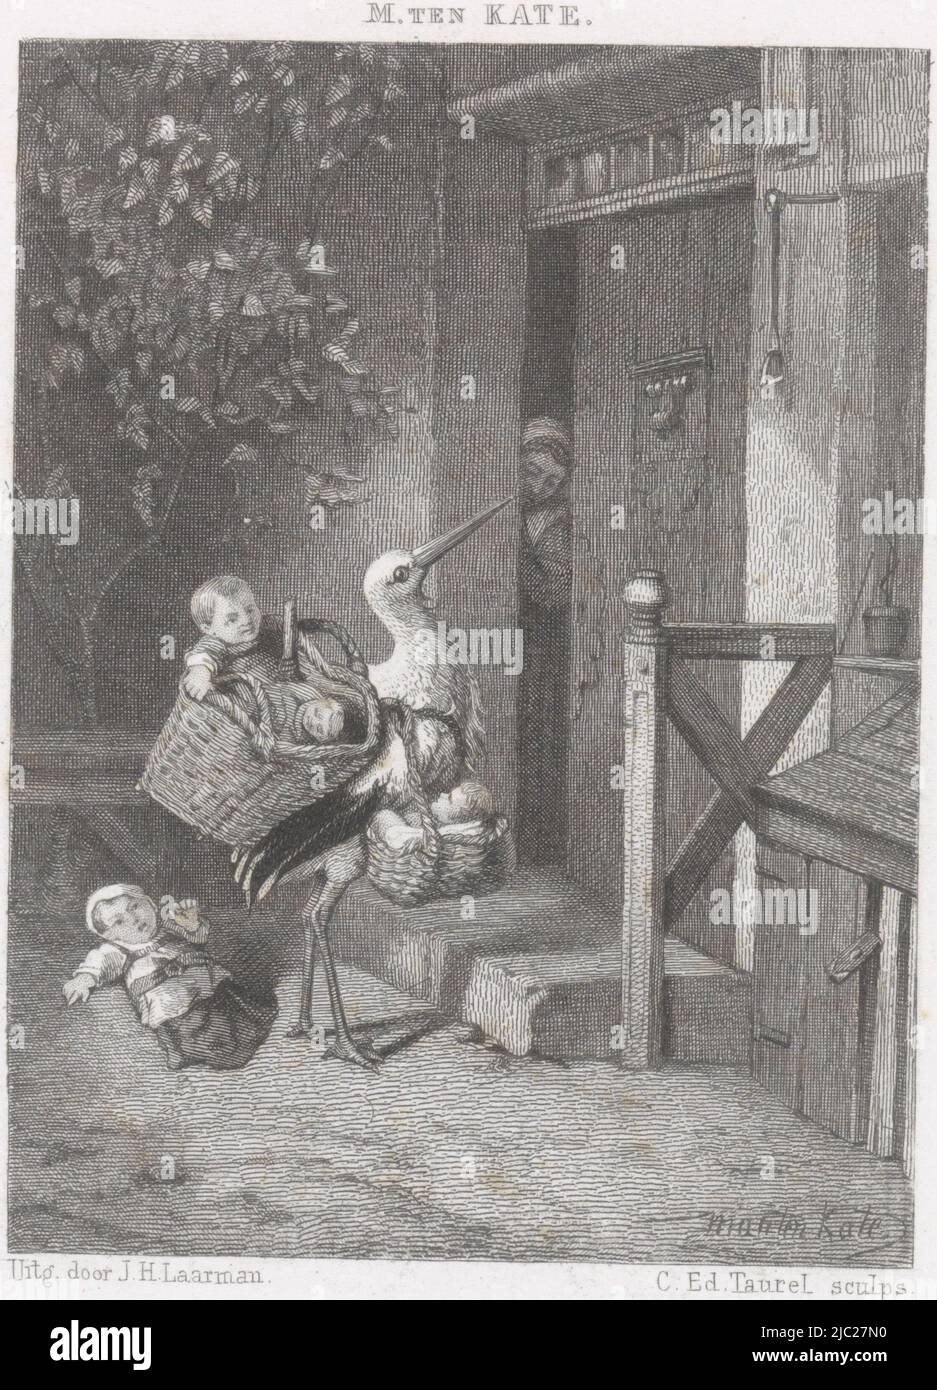 Stork with babies in front of a house door, print maker: Edouard Taurel, (mentioned on object), Mari ten Kate, (mentioned on object), publisher: J.H. Laarman, (mentioned on object), Amsterdam, 1846 - 1892, paper, steel engraving, h 177 mm × w 140 mm Stock Photo